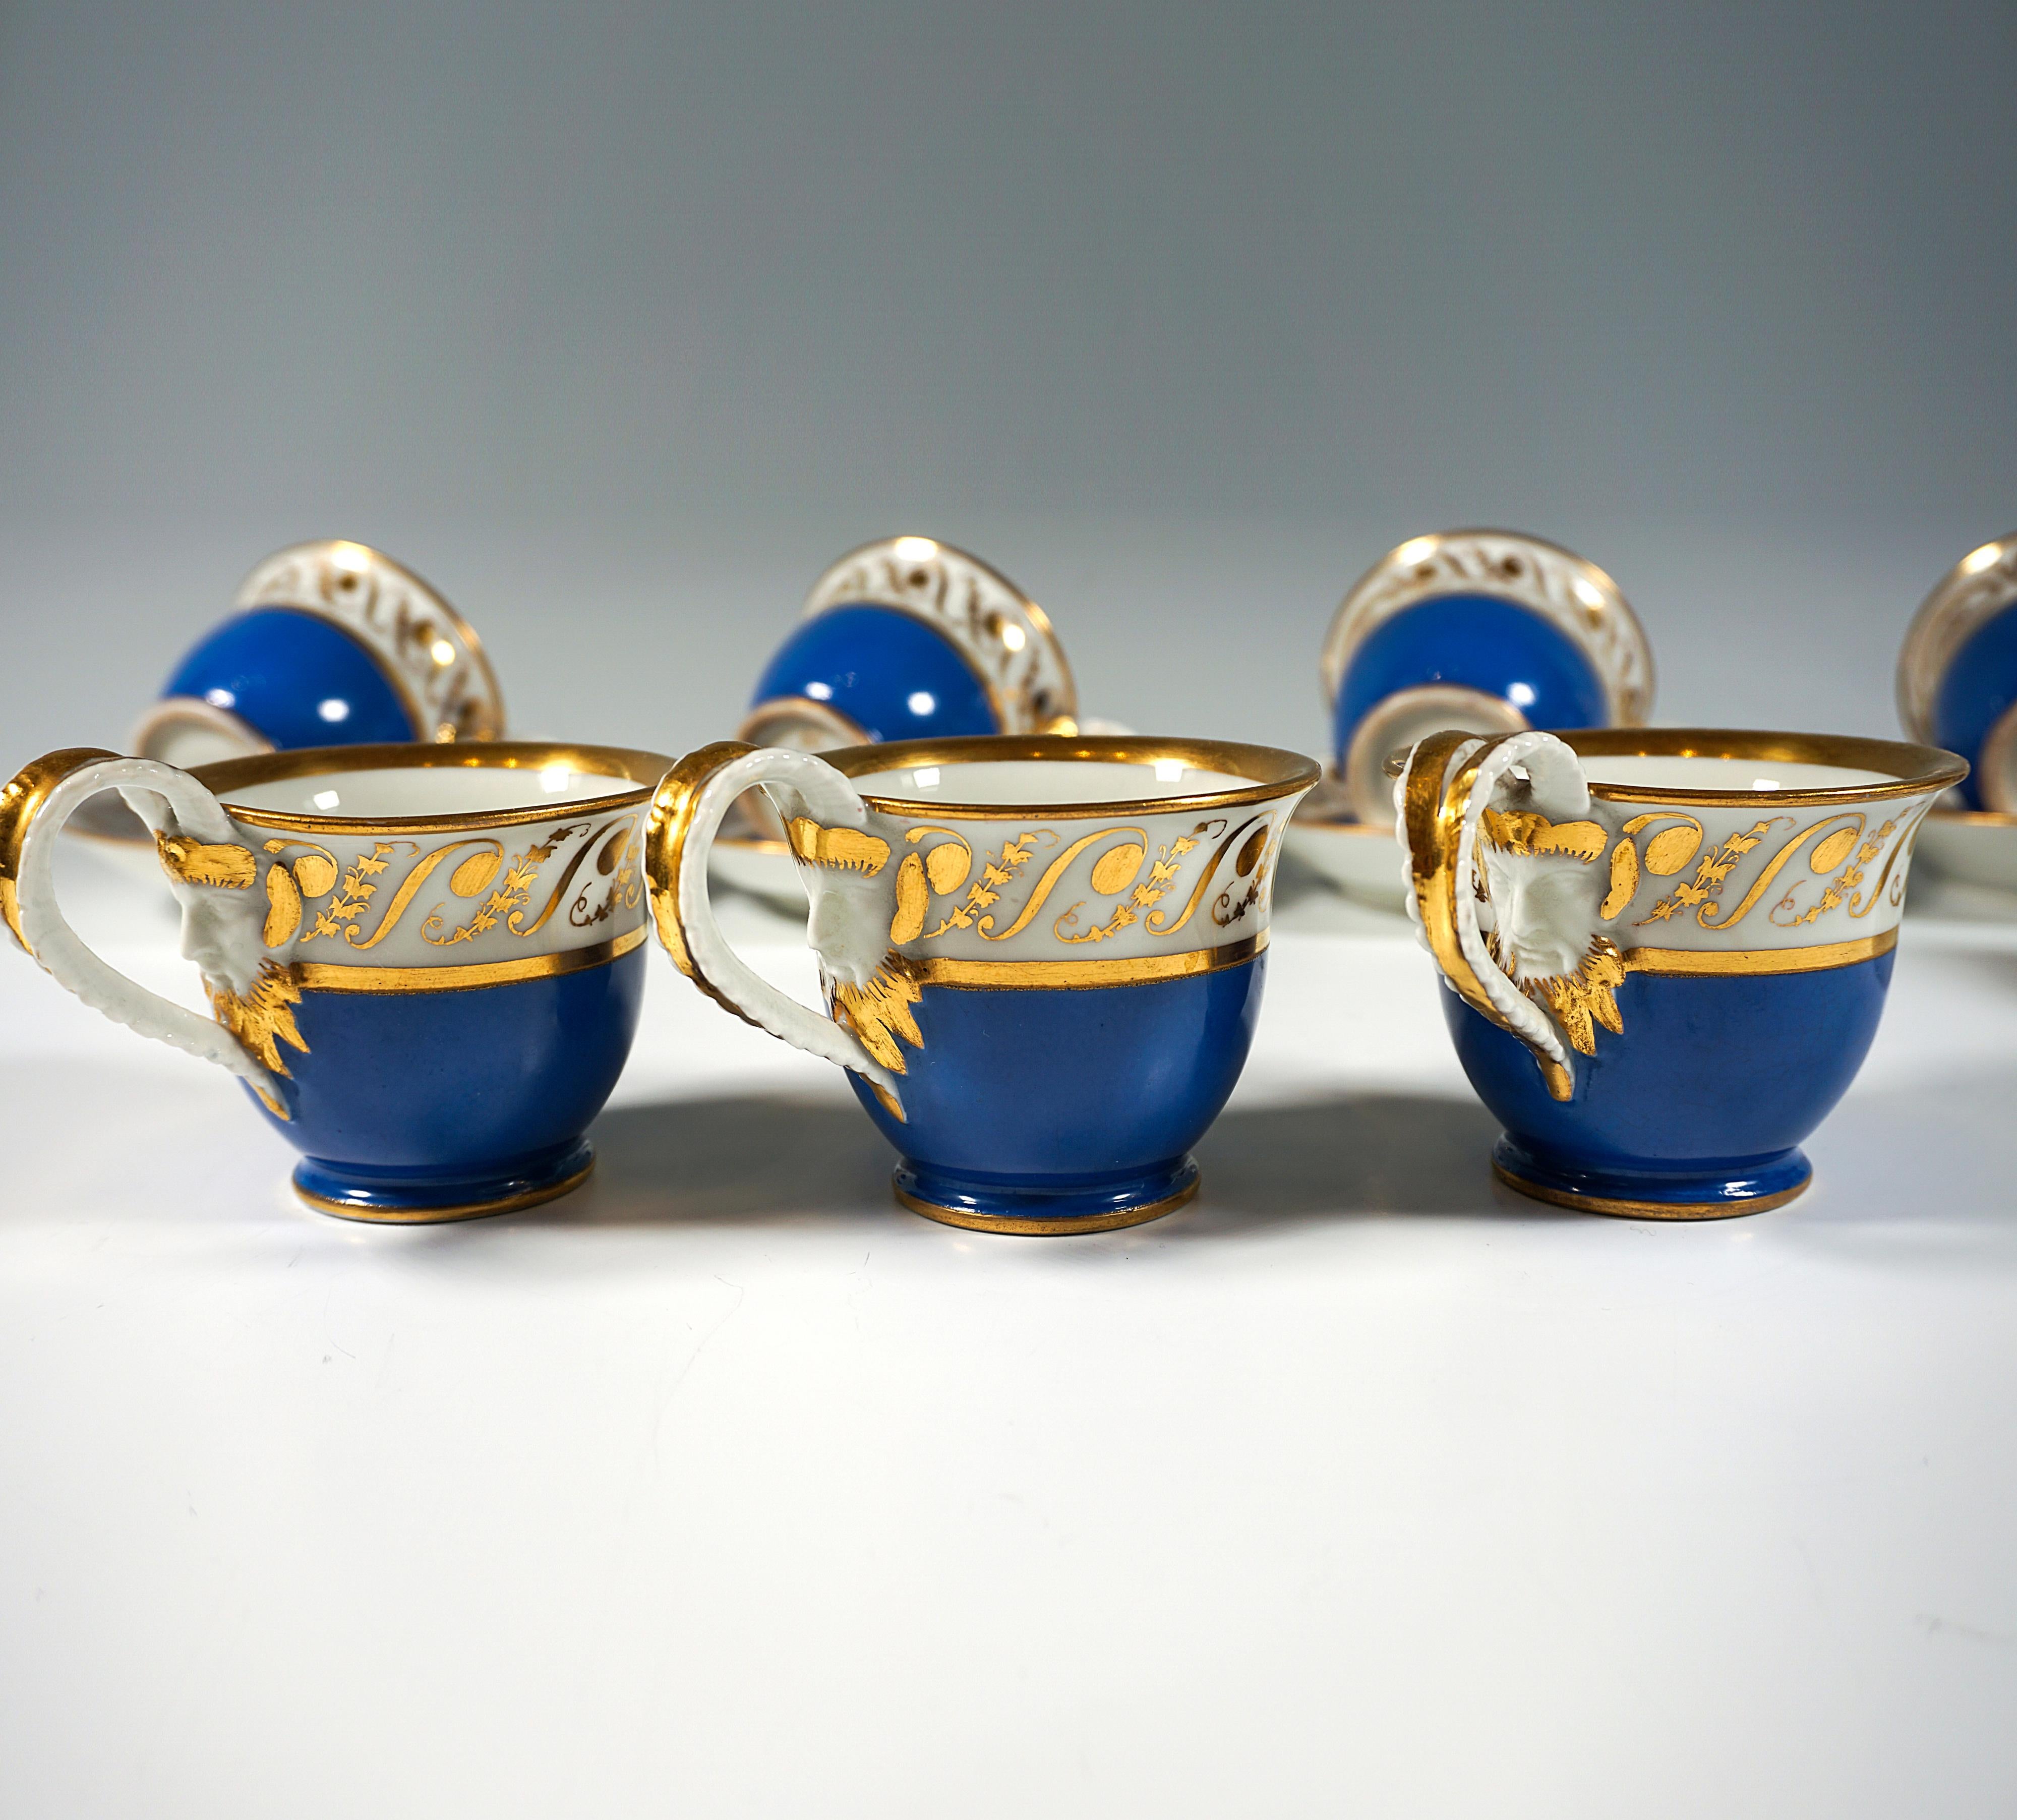 Vienna Imperial Porcelain Coffee Service, 8 People, Prussian Blue & Gold, 1825 For Sale 1